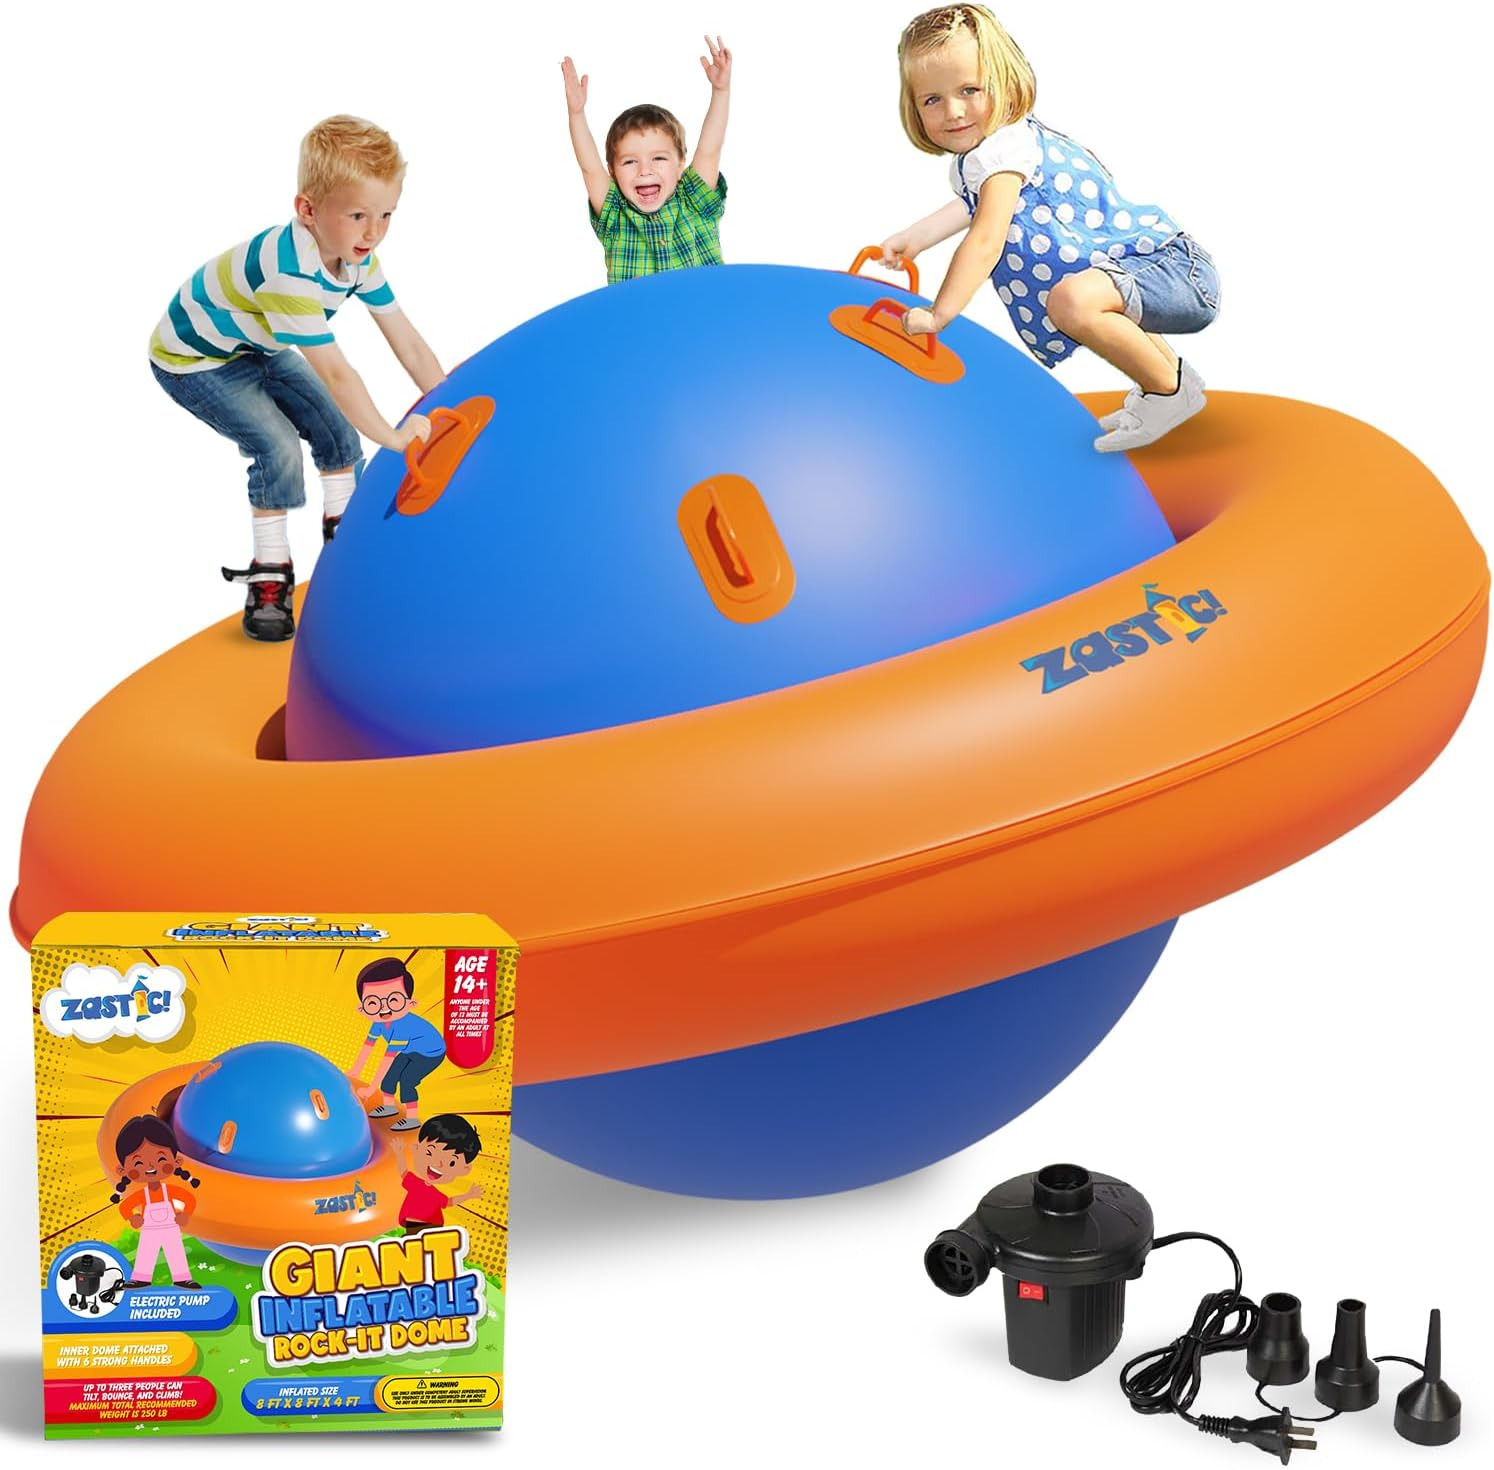 Giant Inflatable 8Ft Rock-It Rocker Bouncer Dome with Electric Pump - 88”L X 88”